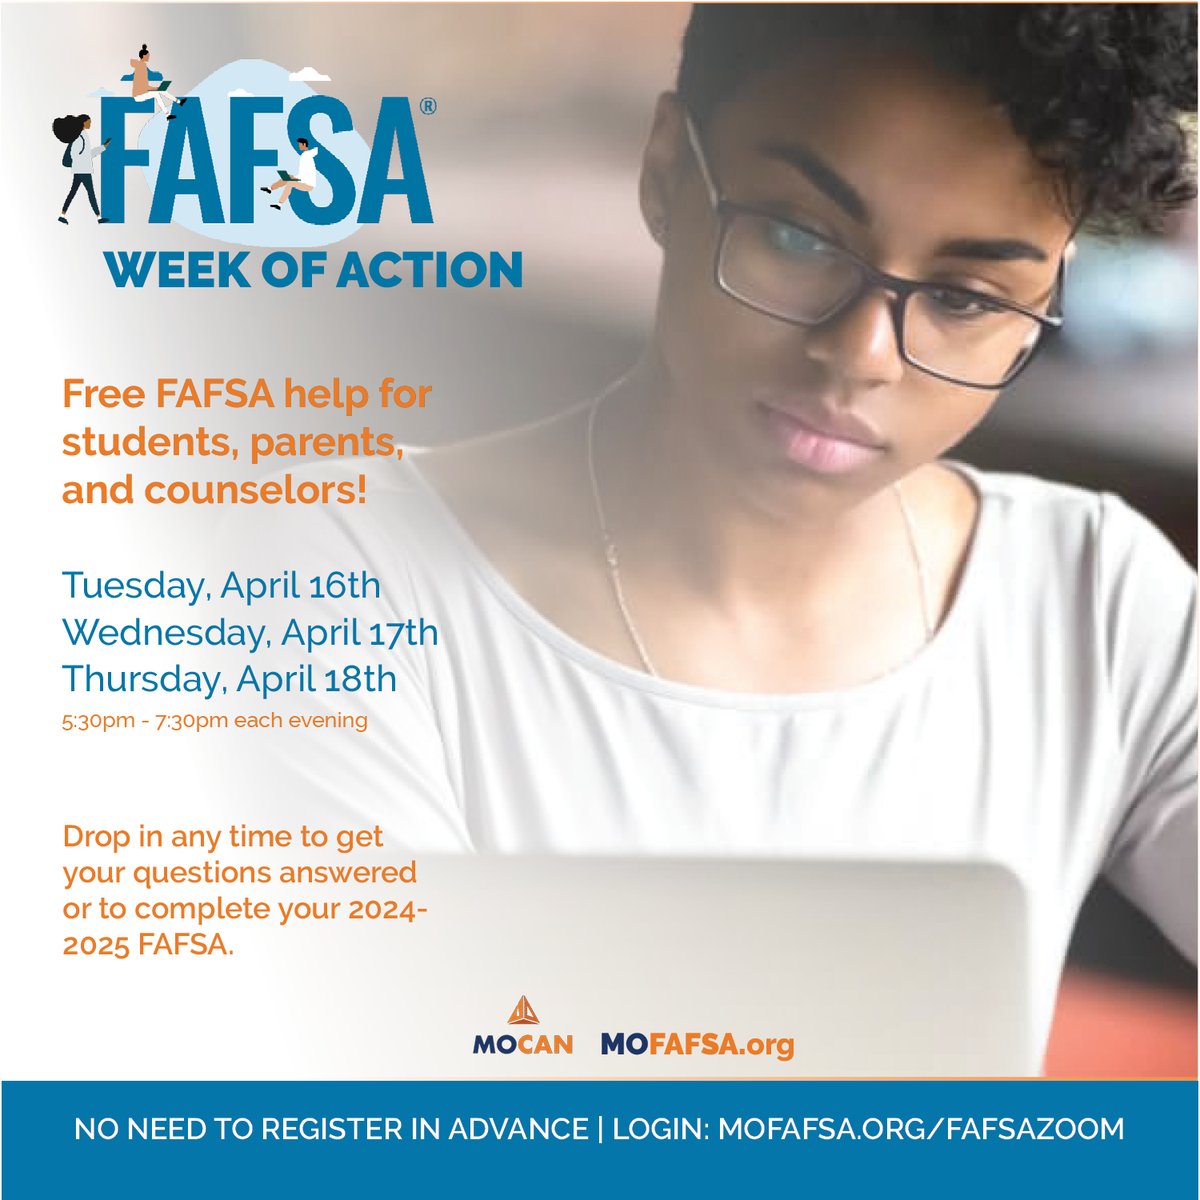 MOCAN is excited to be part of the National FAFSA Week of Action, April 15-19! Let's support students in completing their FAFSA for the 2024-25 academic year. Learn more: mofafsa.org #FAFSA #FinancialAid #moneyforcollege